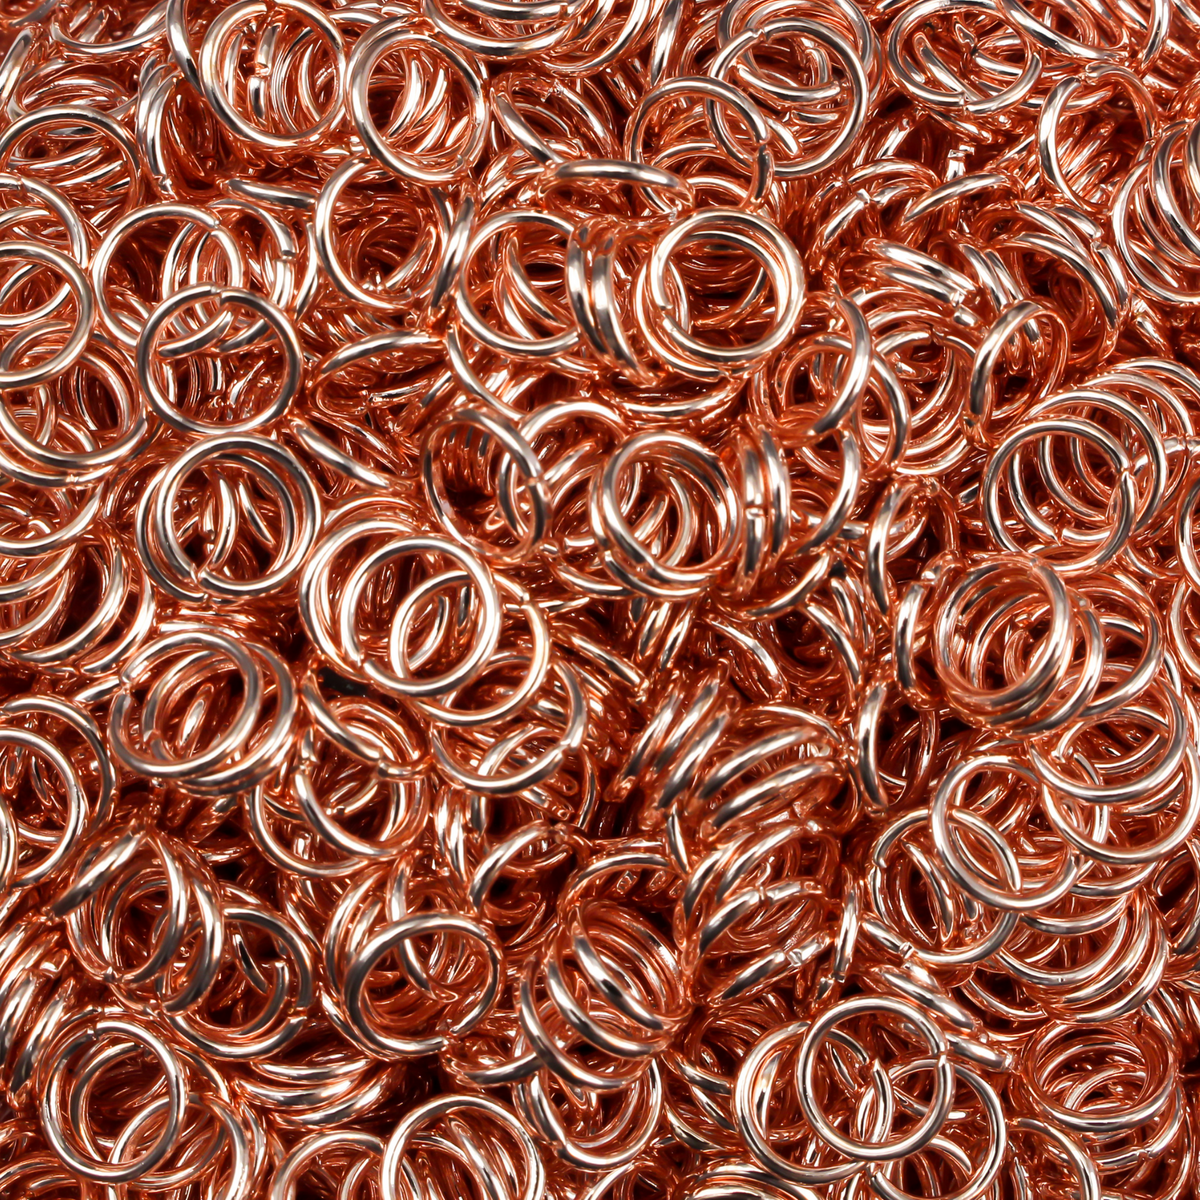 Wholesale Jewelry Supplies - 25 Pieces - 14k Rose Gold Filled Open Jump  Rings - 5mm Jump Ring - Jewelry Closure - Pink Gold Findings - Wholesale  Jewelry Supplies – HarperCrown